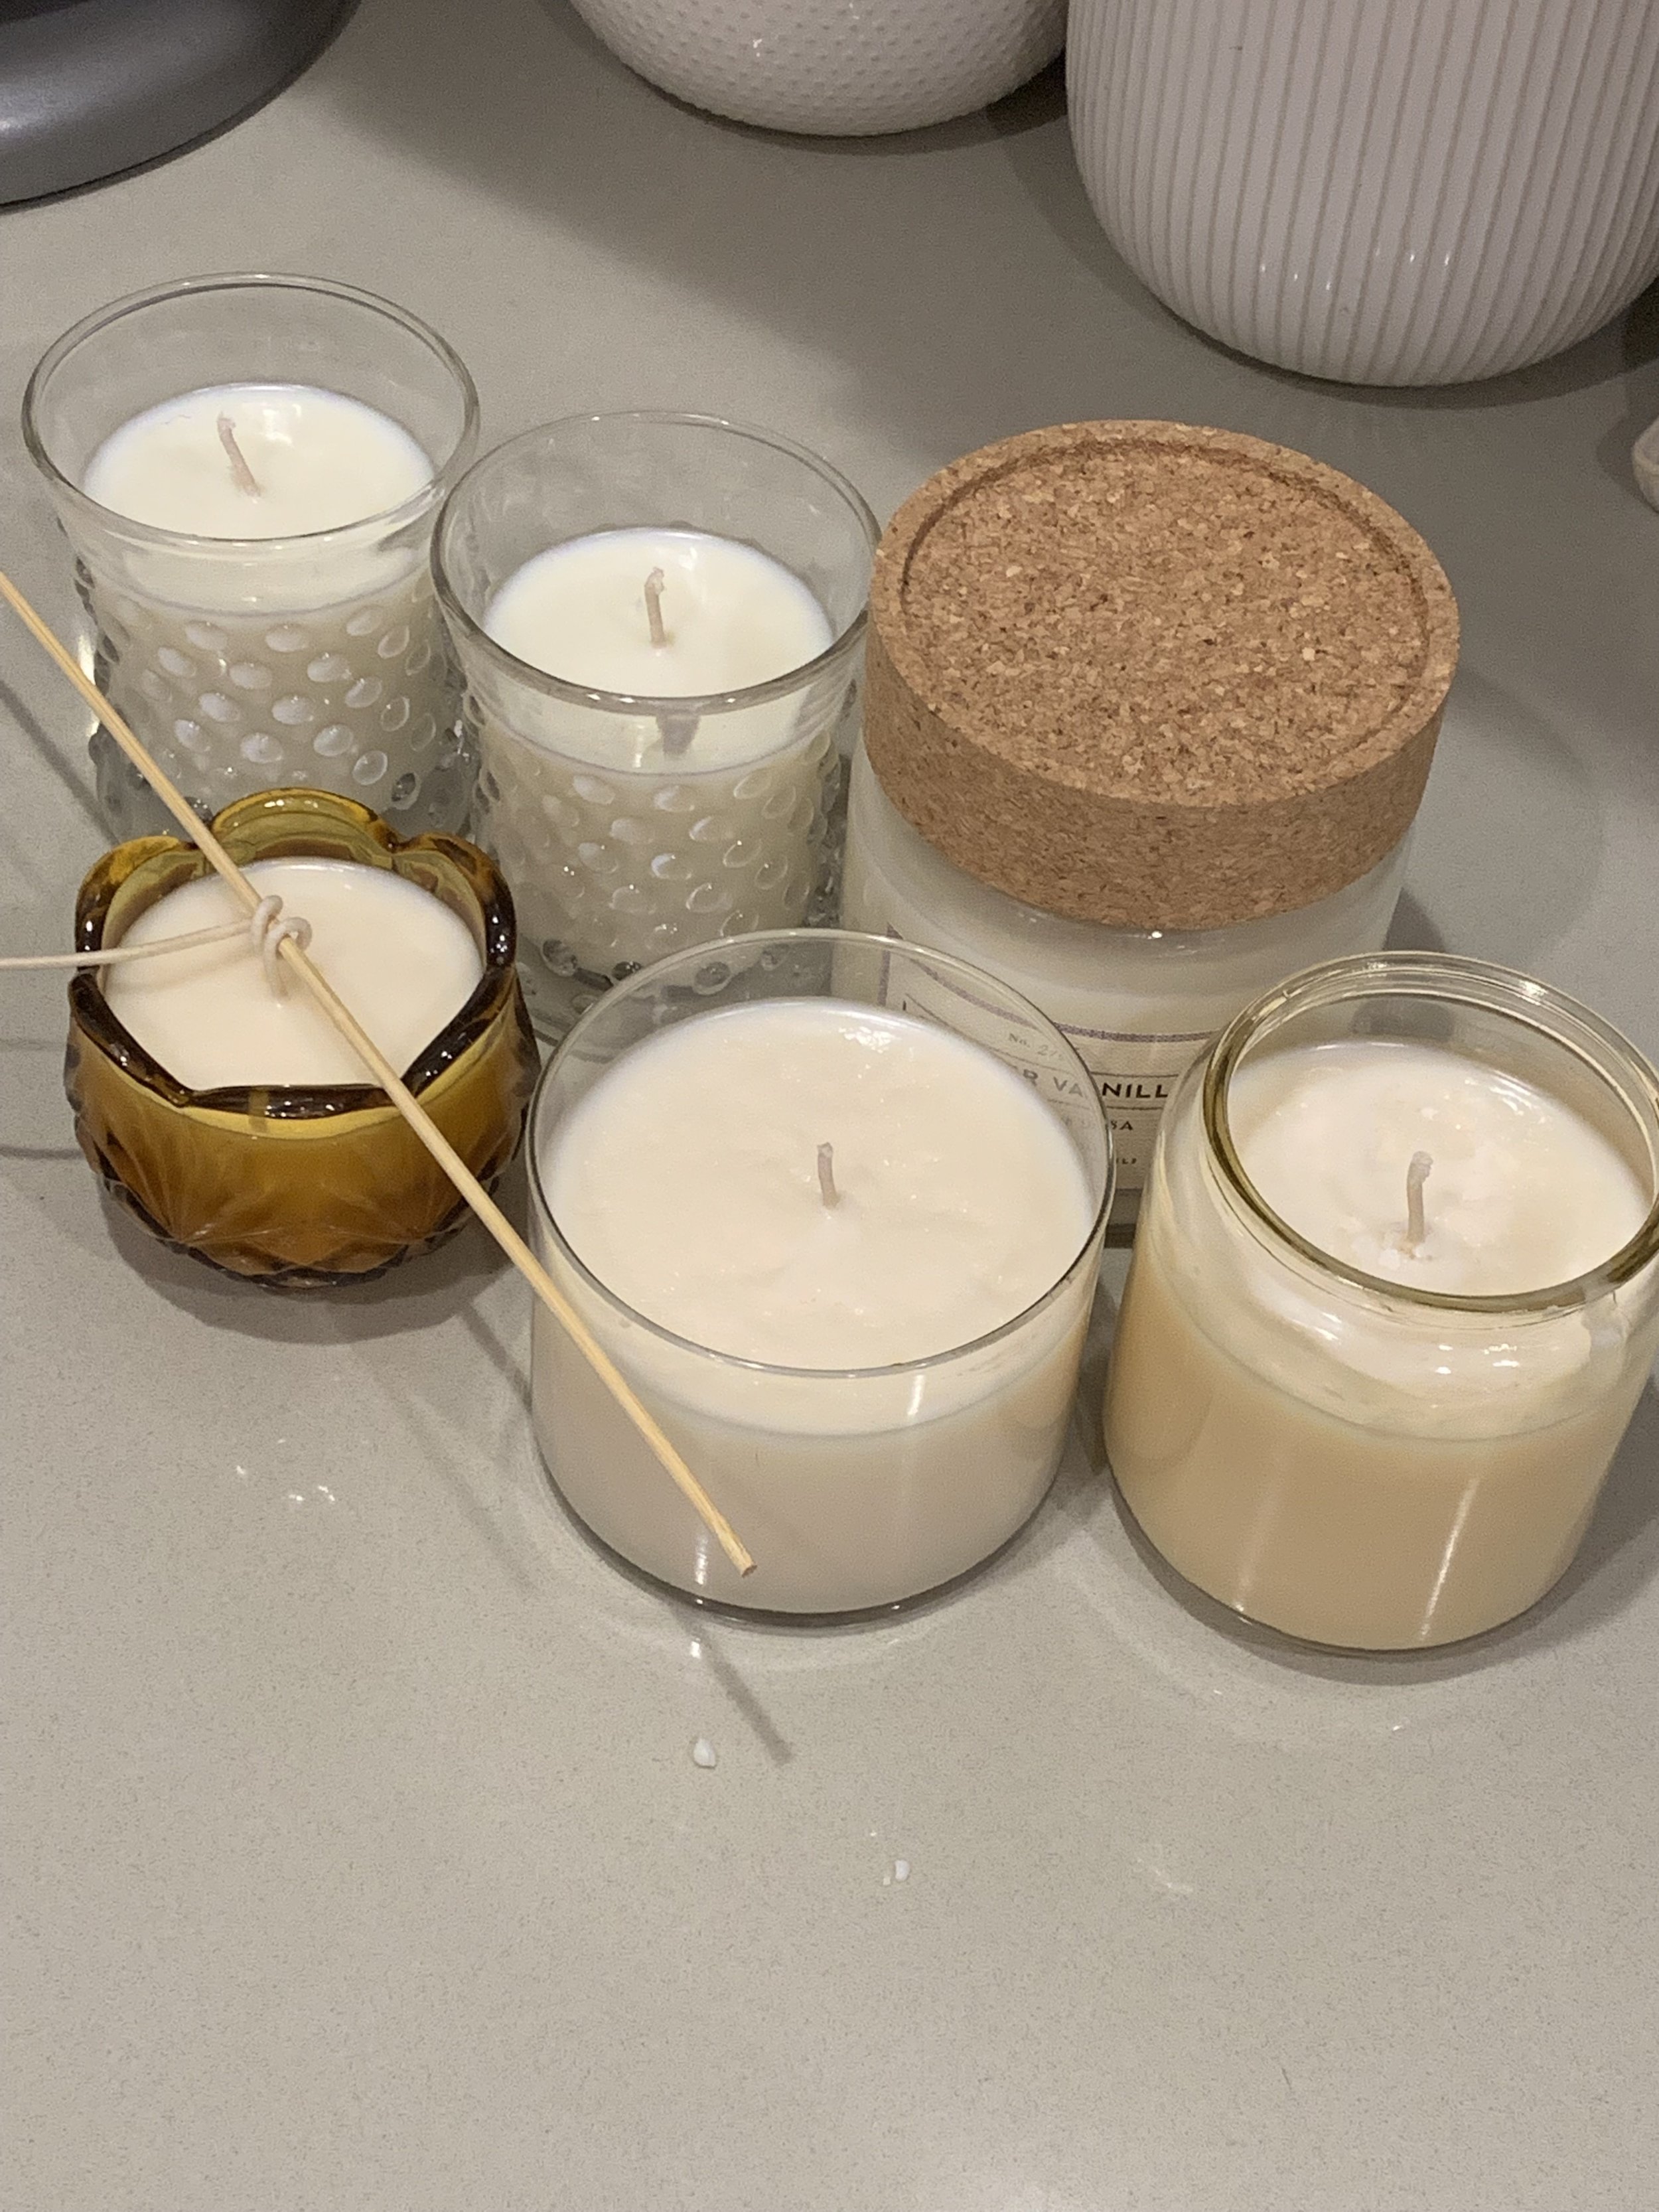 How to reuse candle jars to make more candles — Laurel Twist & Co.